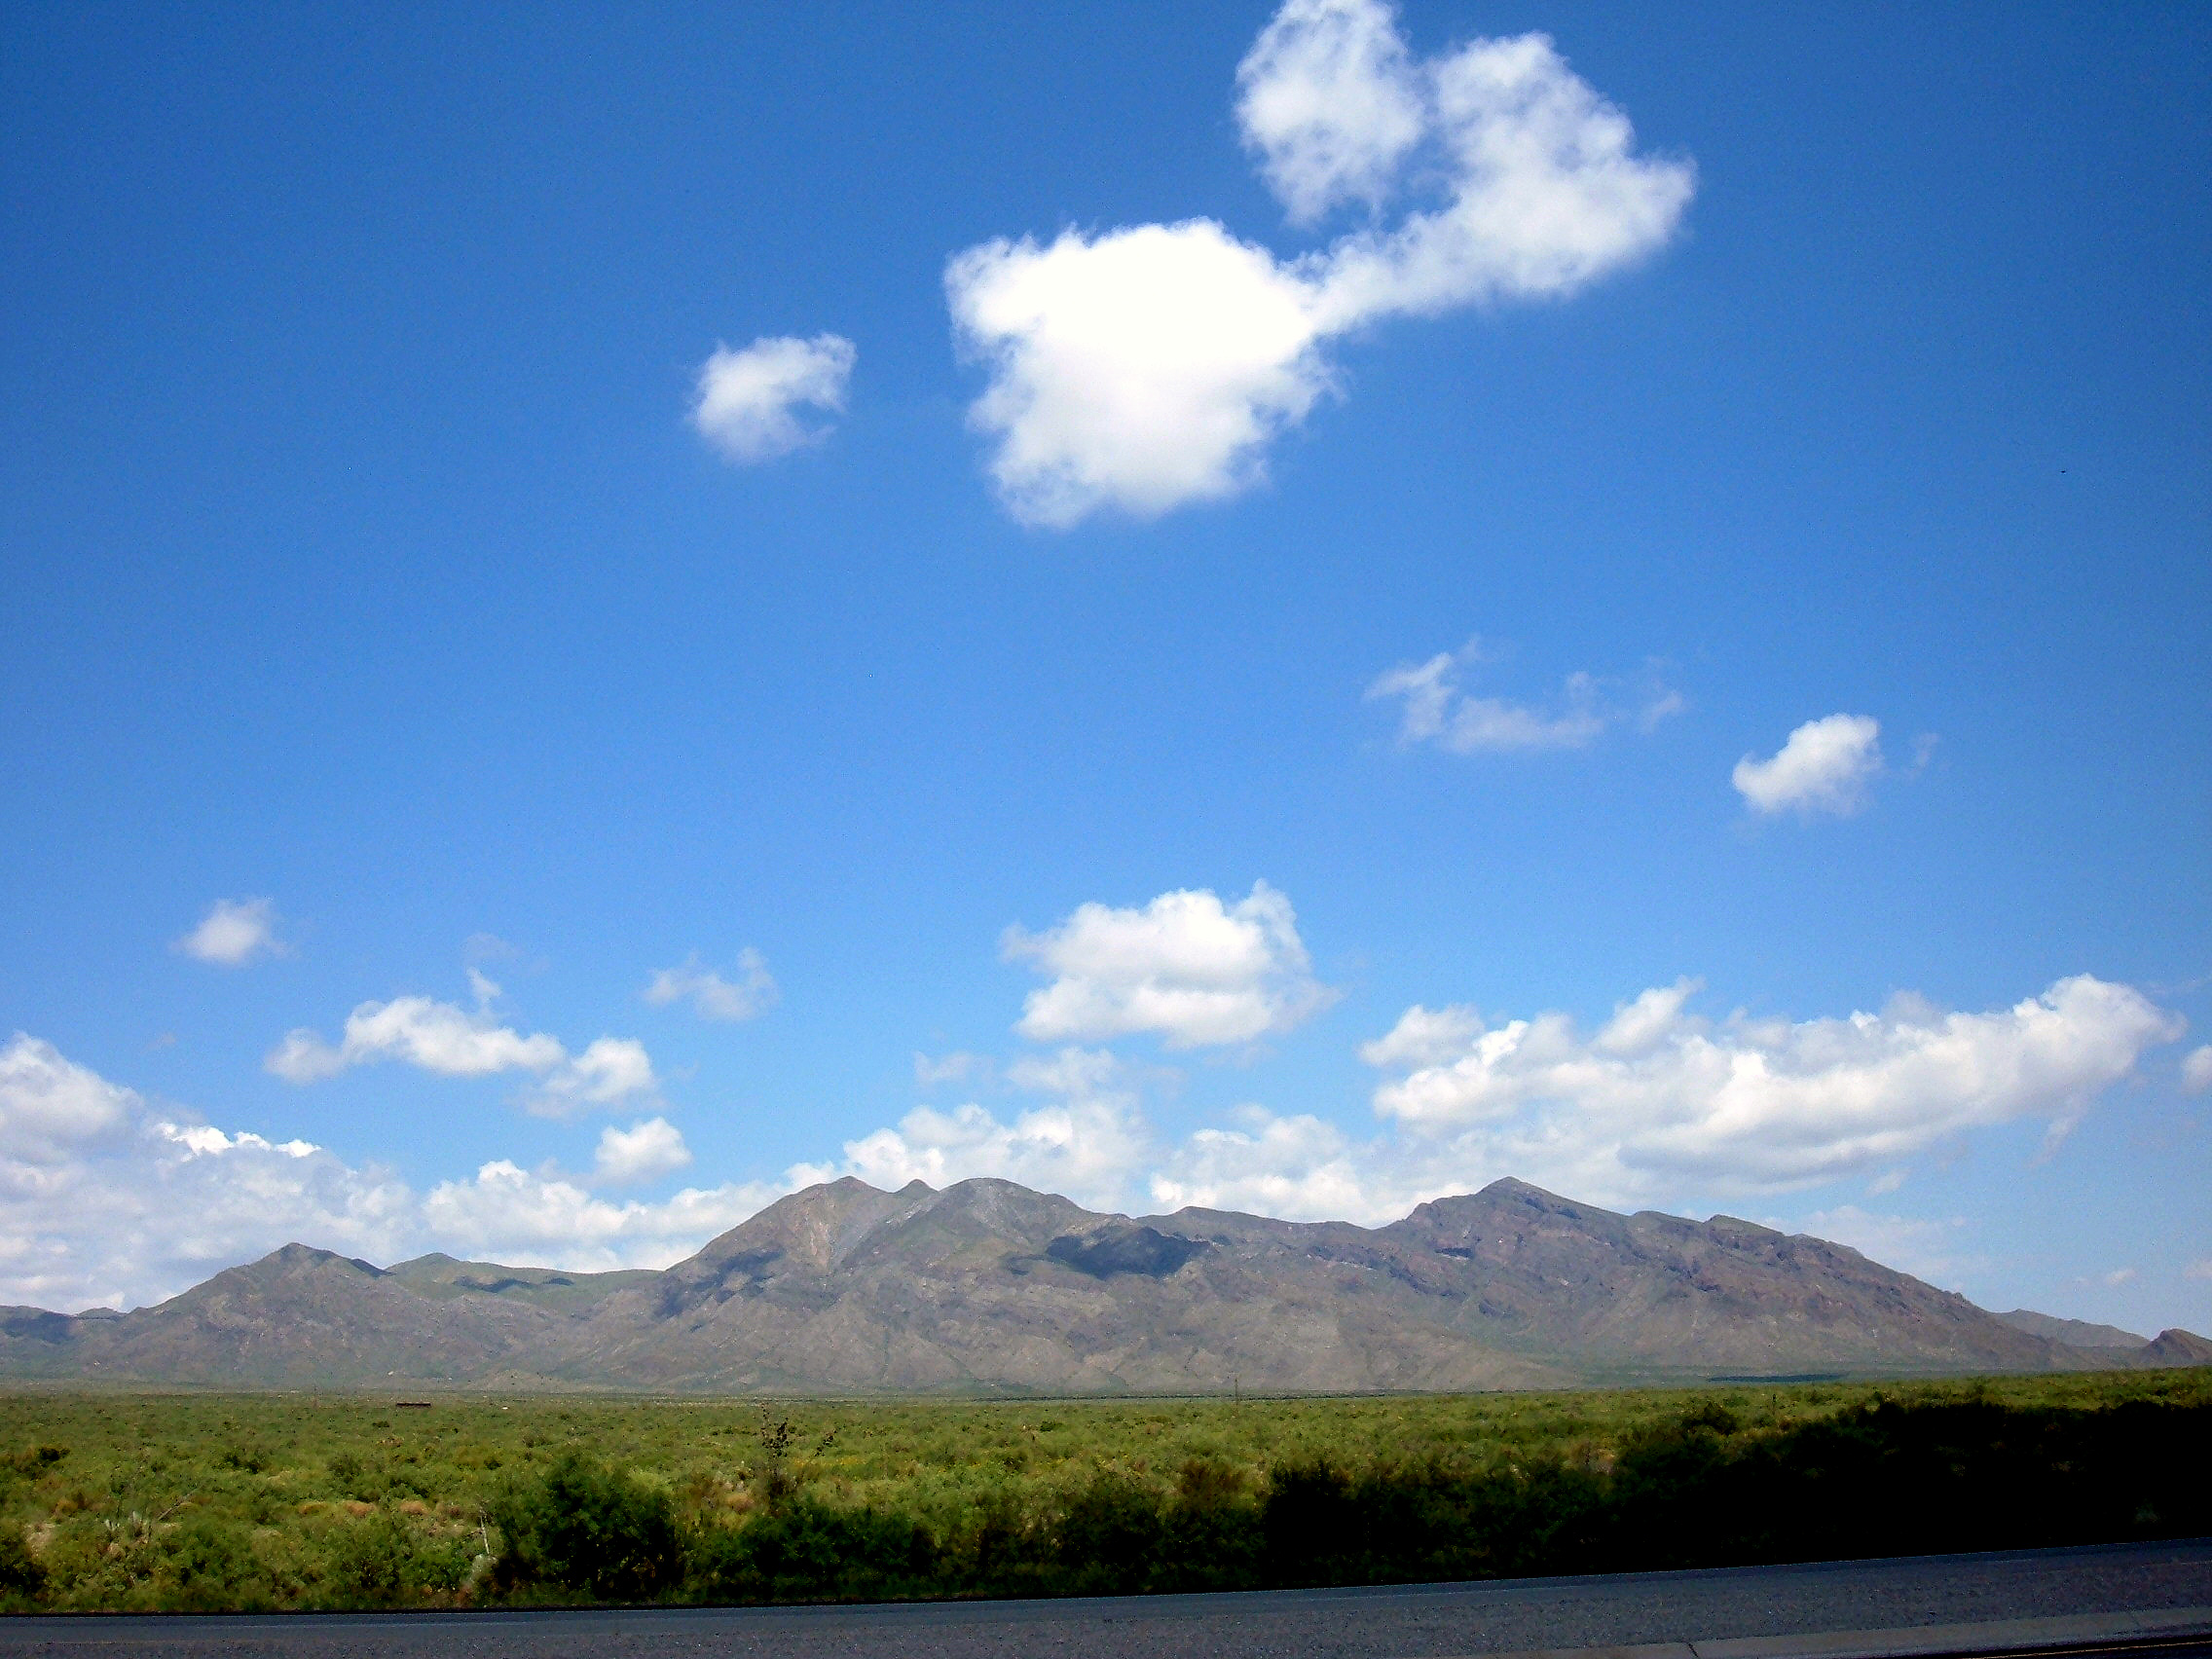 File:San Andres Mountains east Las Cruces.jpg - Wikipedia